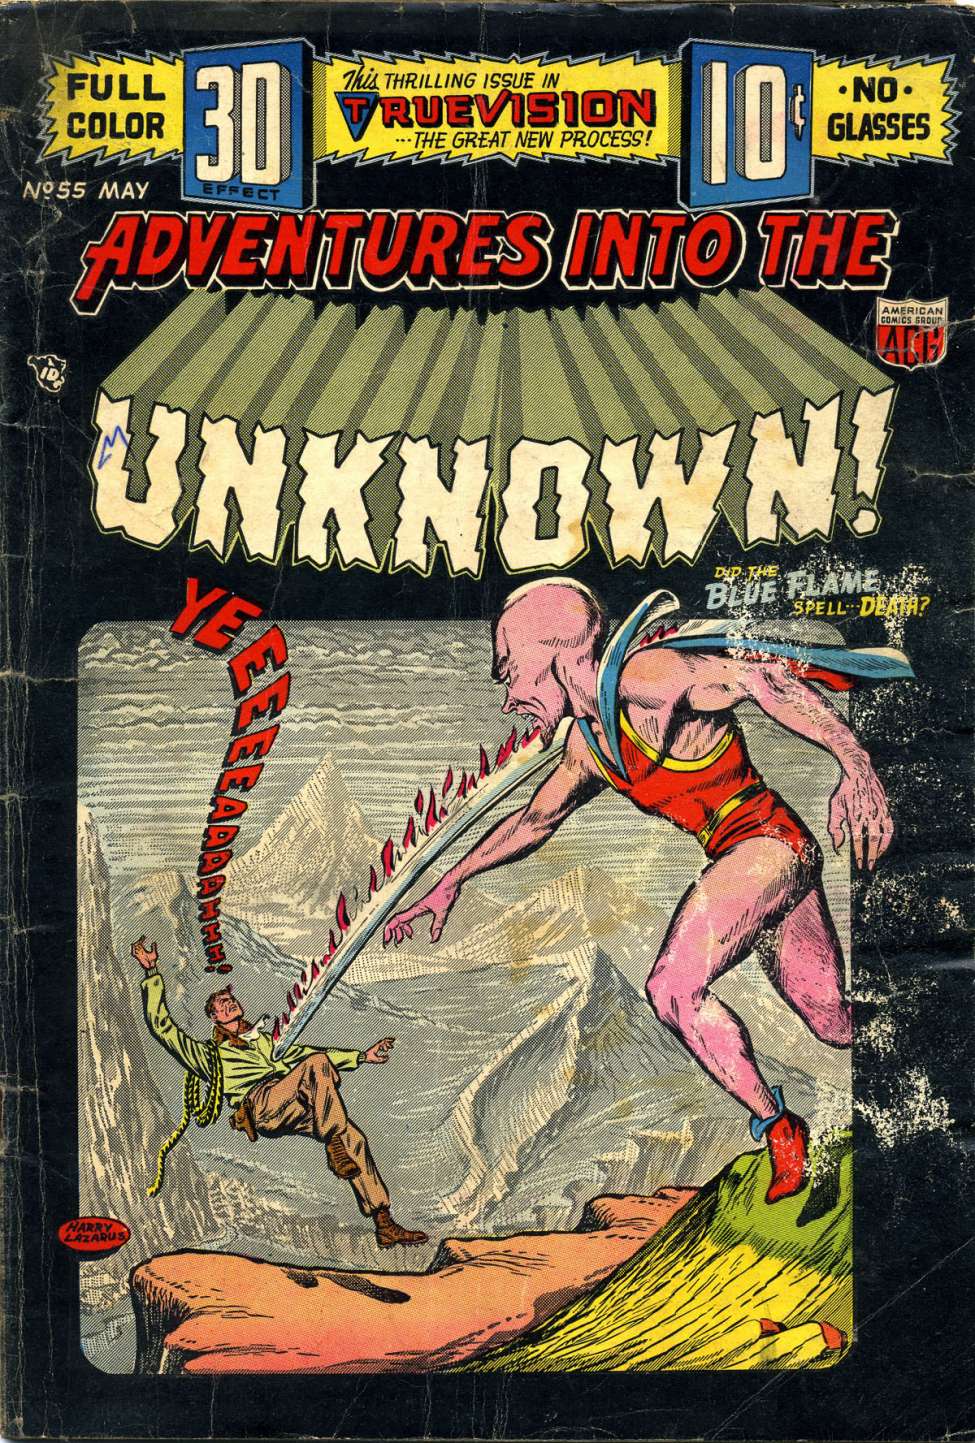 Comic Book Cover For Adventures into the Unknown 55